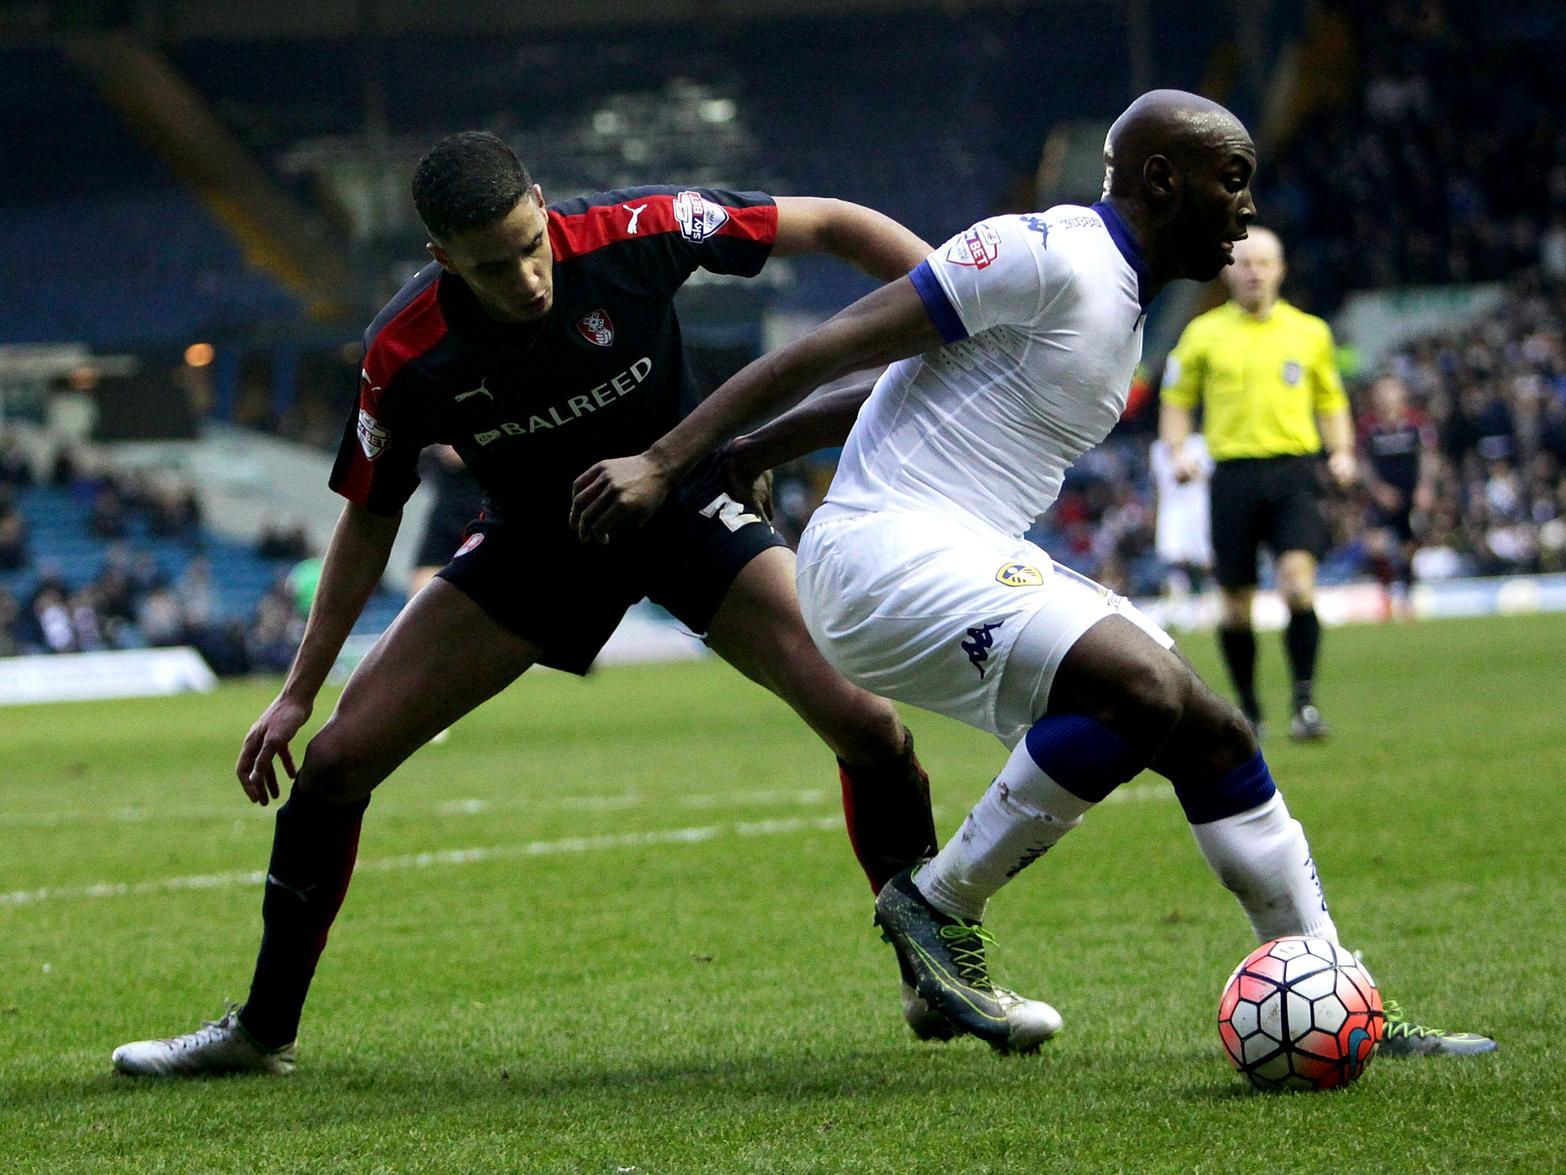 Mustapha Carayol scored on his Leeds United debut as his side advanced to face Bolton in the fourth round before losing to Watford in the fifth.